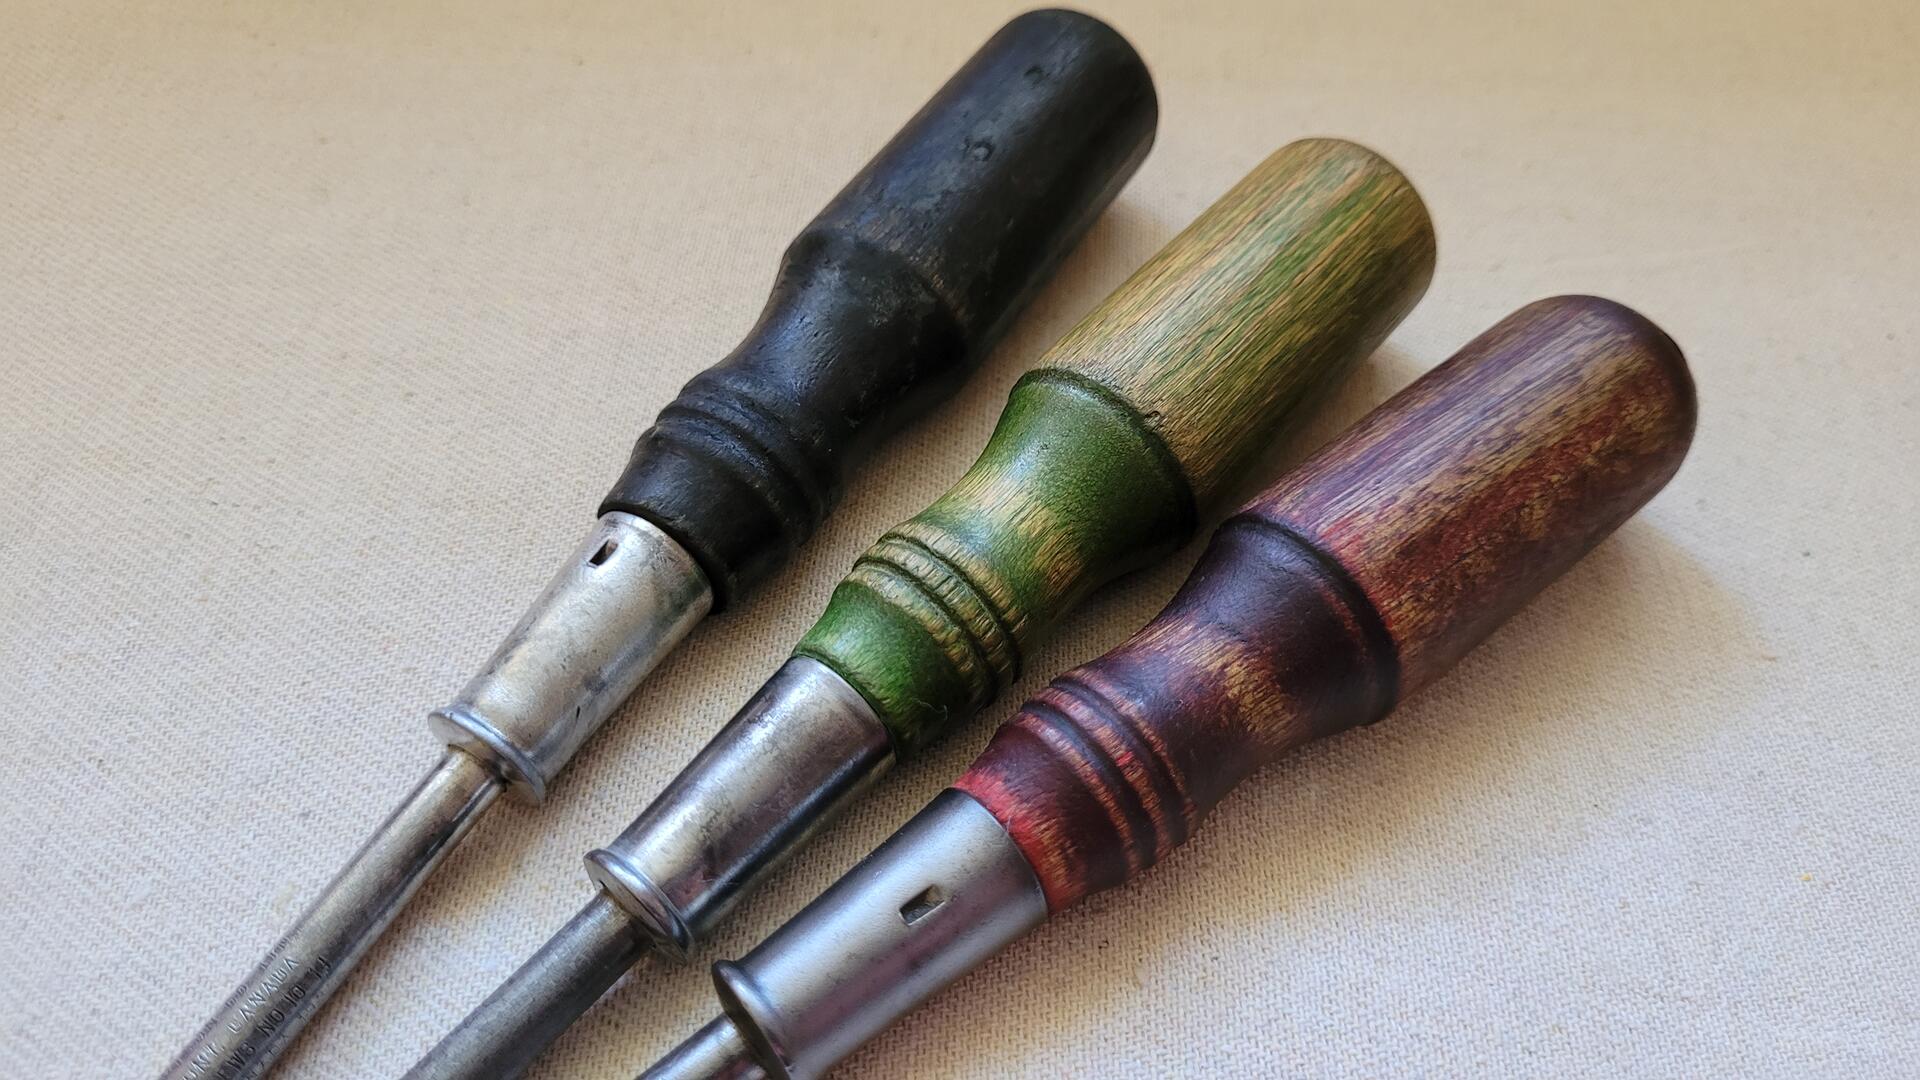 Original Robertson Wooden Handle Screwdrivers Set Milton ON - Vintage and antique made in Canada collectible hand tools